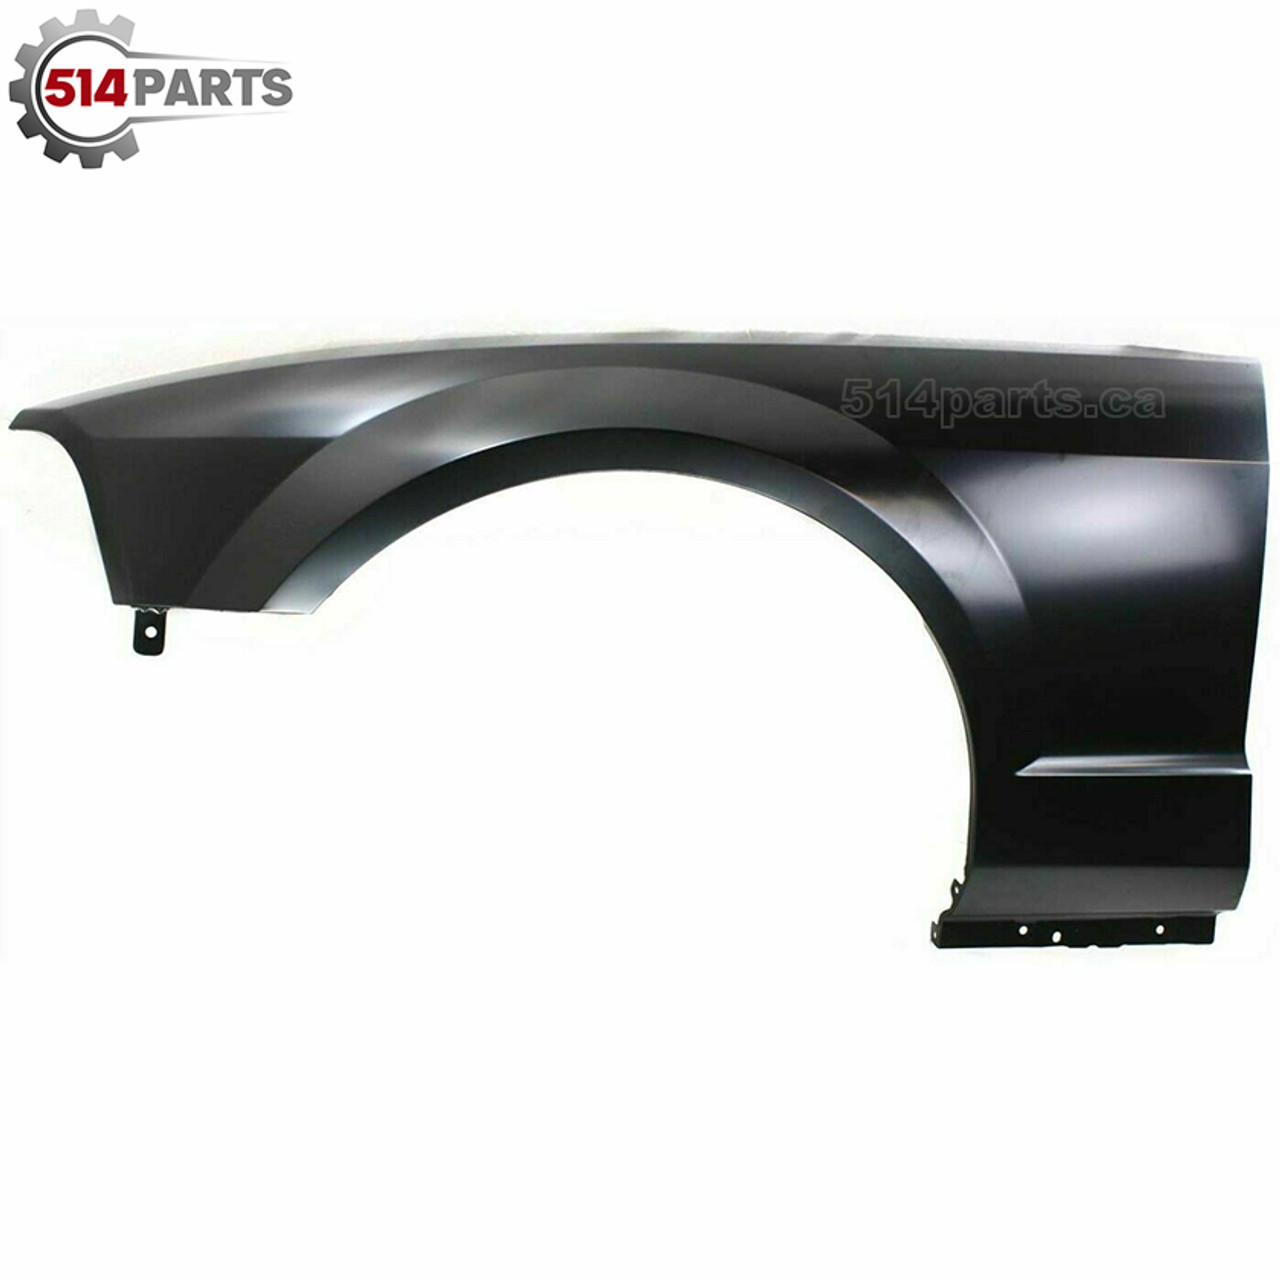 2005 - 2009 FORD MUSTANG and MUSTANG GT FRONT FENDERS - AILES AVANT